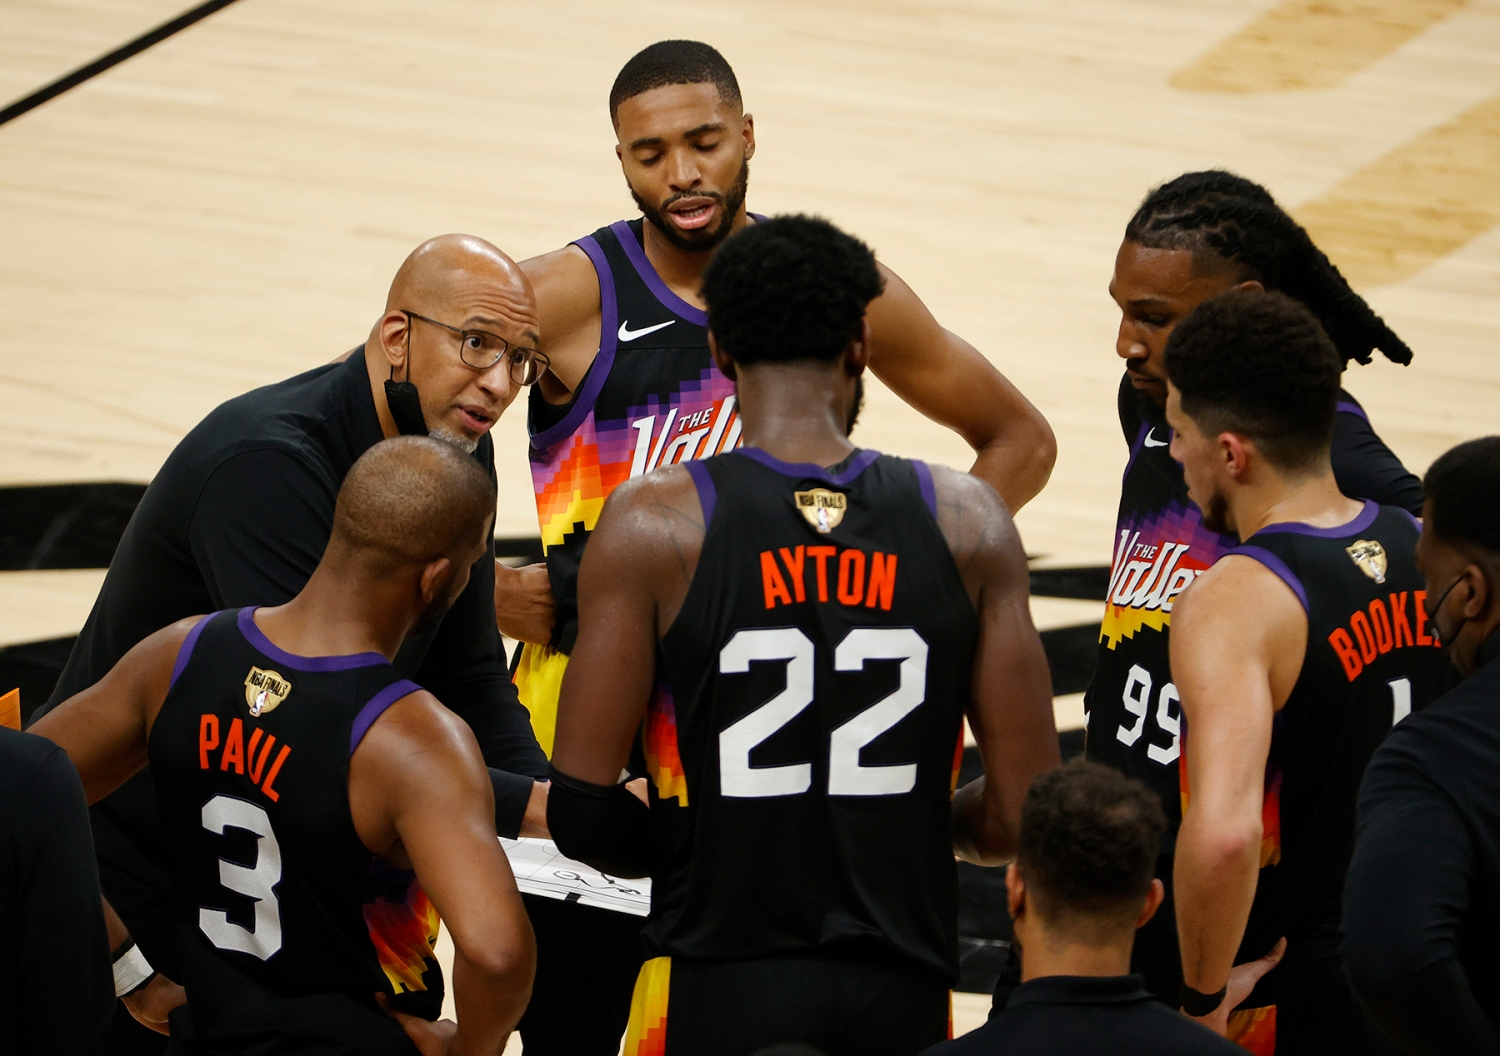 PHOENIX, ARIZONA - JULY 17: Head coach Monty Williams of the Phoenix Suns huddles his team during a time out against the Milwaukee Bucks during the second half in Game Five of the NBA Finals at Footprint Center on July 17, 2021 in Phoenix, Arizona. NOTE TO USER: User expressly acknowledges and agrees that, by downloading and or using this photograph, User is consenting to the terms and conditions of the Getty Images License Agreement. (Photo by Christian Petersen/Getty Images)